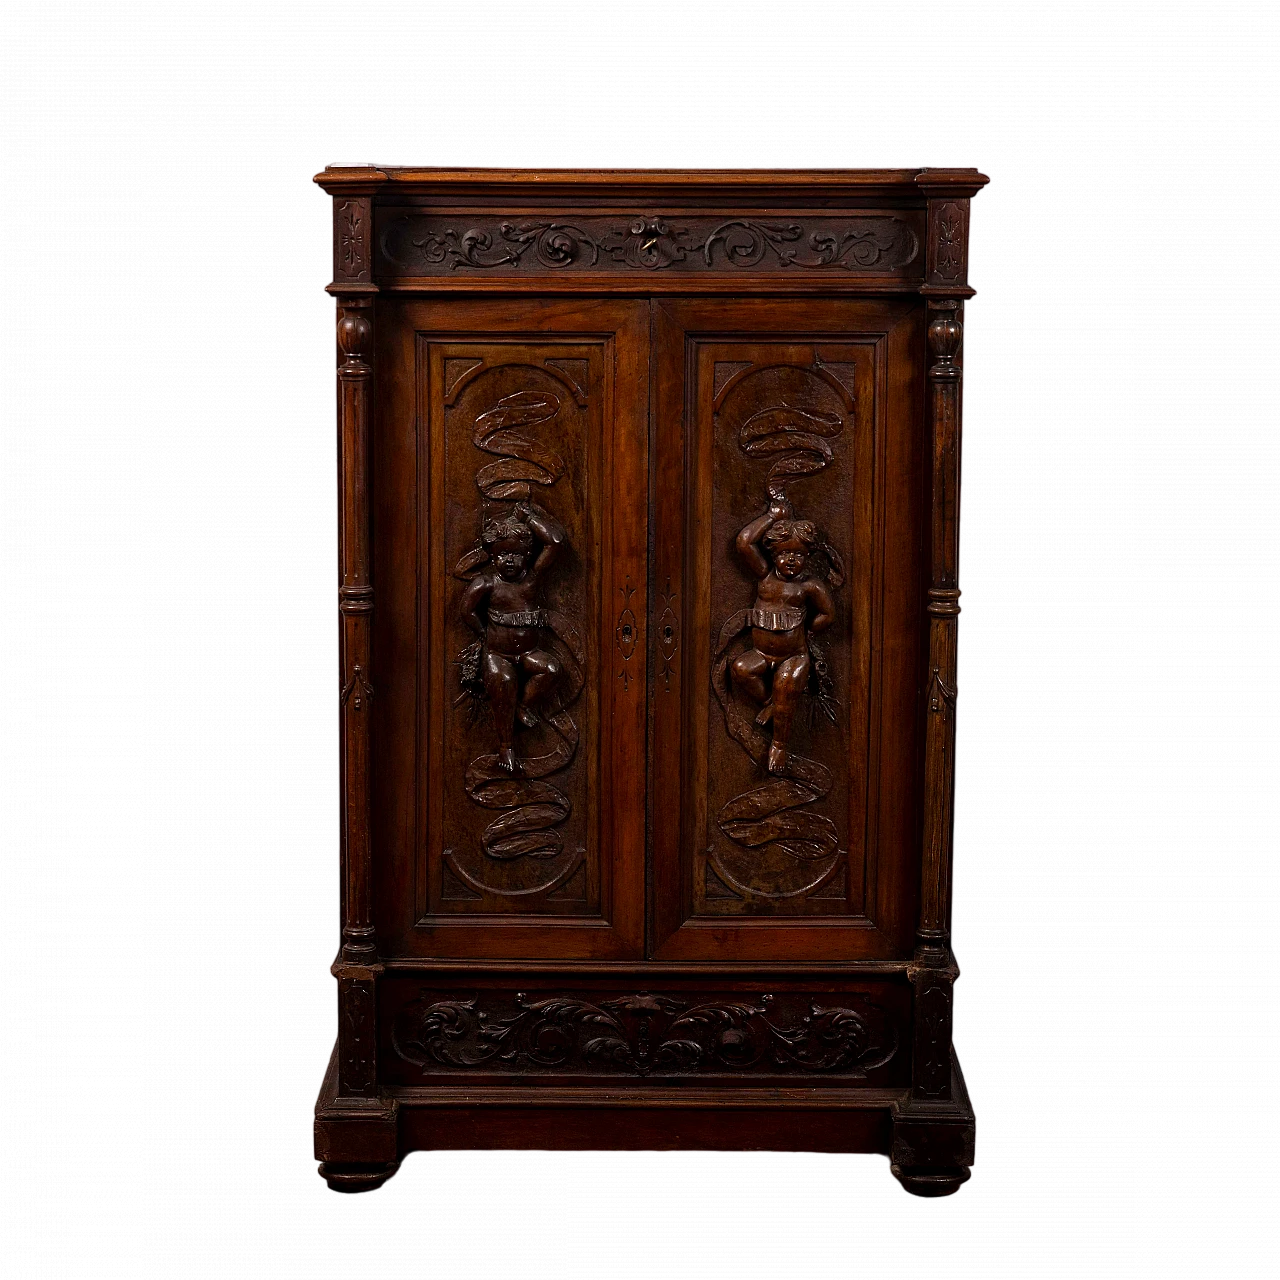 Wood secrétaire with carvings, late 19th century 9